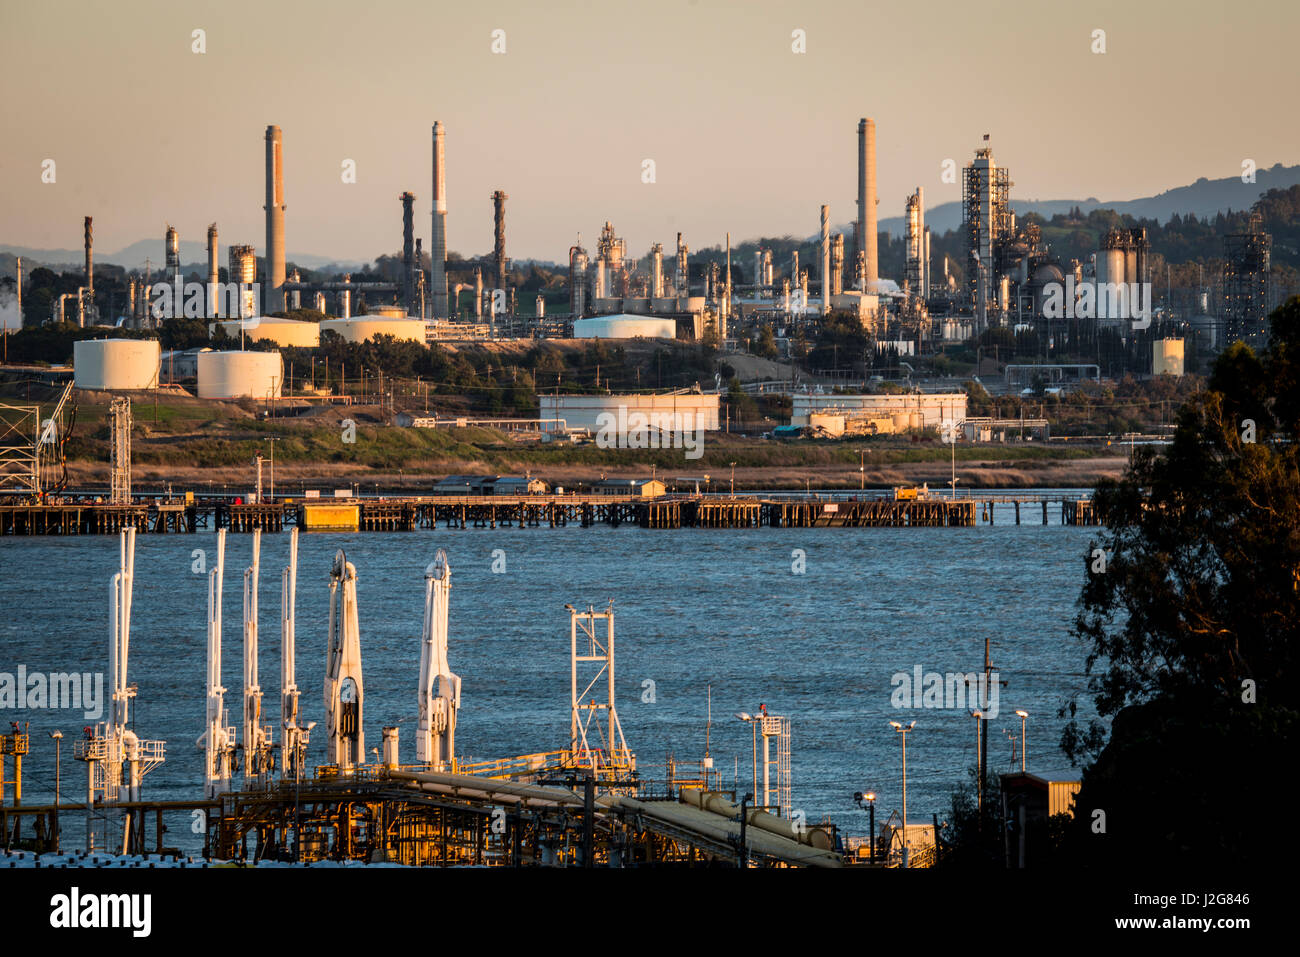 USA, California, Benicia, Refineries on Carquinez Strait where the Sacramento-San Joaquin River Delta enters San Pablo Bay, the northern extension of the San Francisco Bay (Large format sizes available) Stock Photo